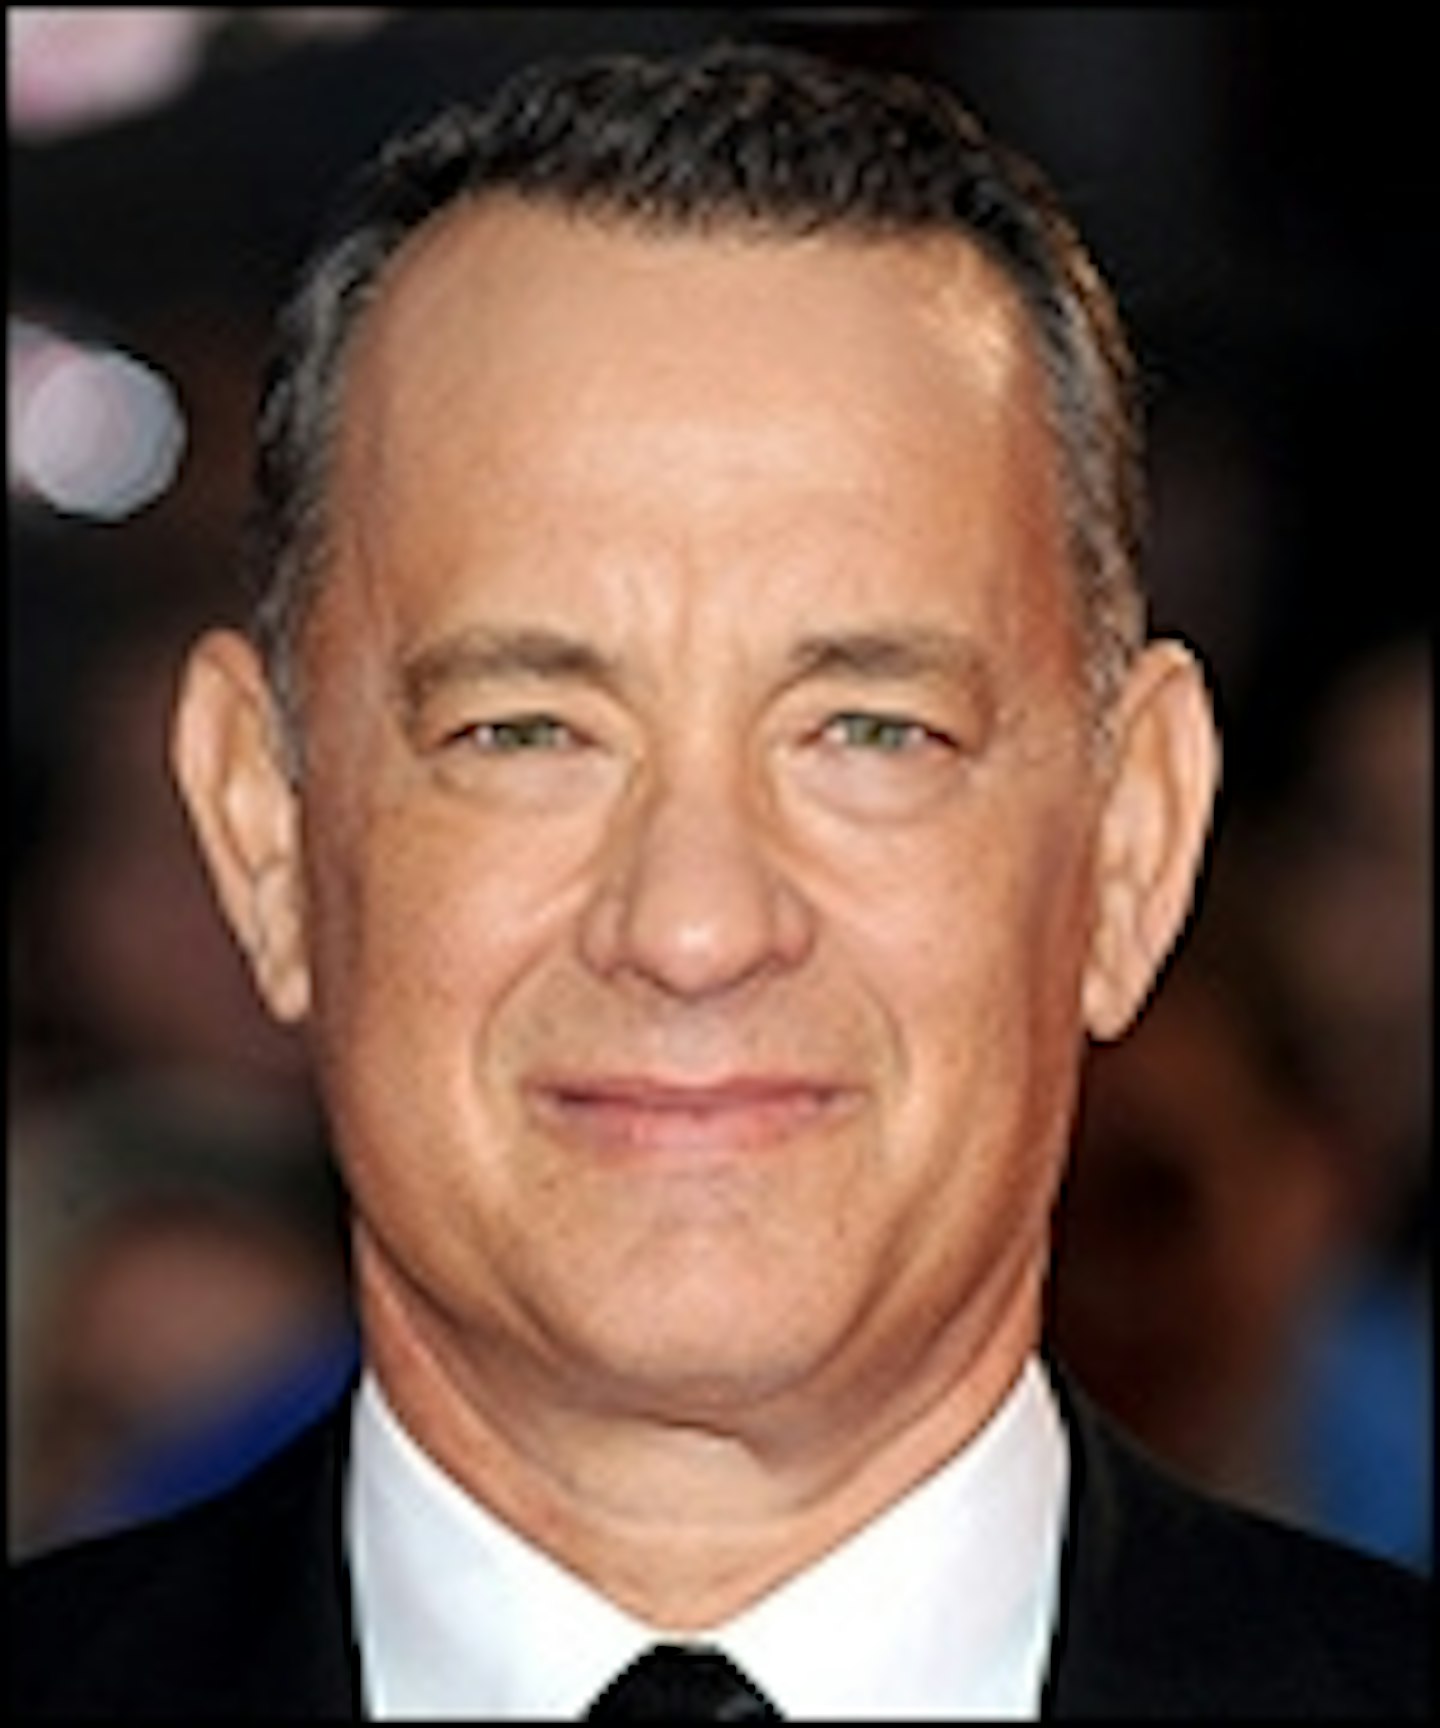 Tom Hanks In Negotiations To Be Clint Eastwood's Captain Sully